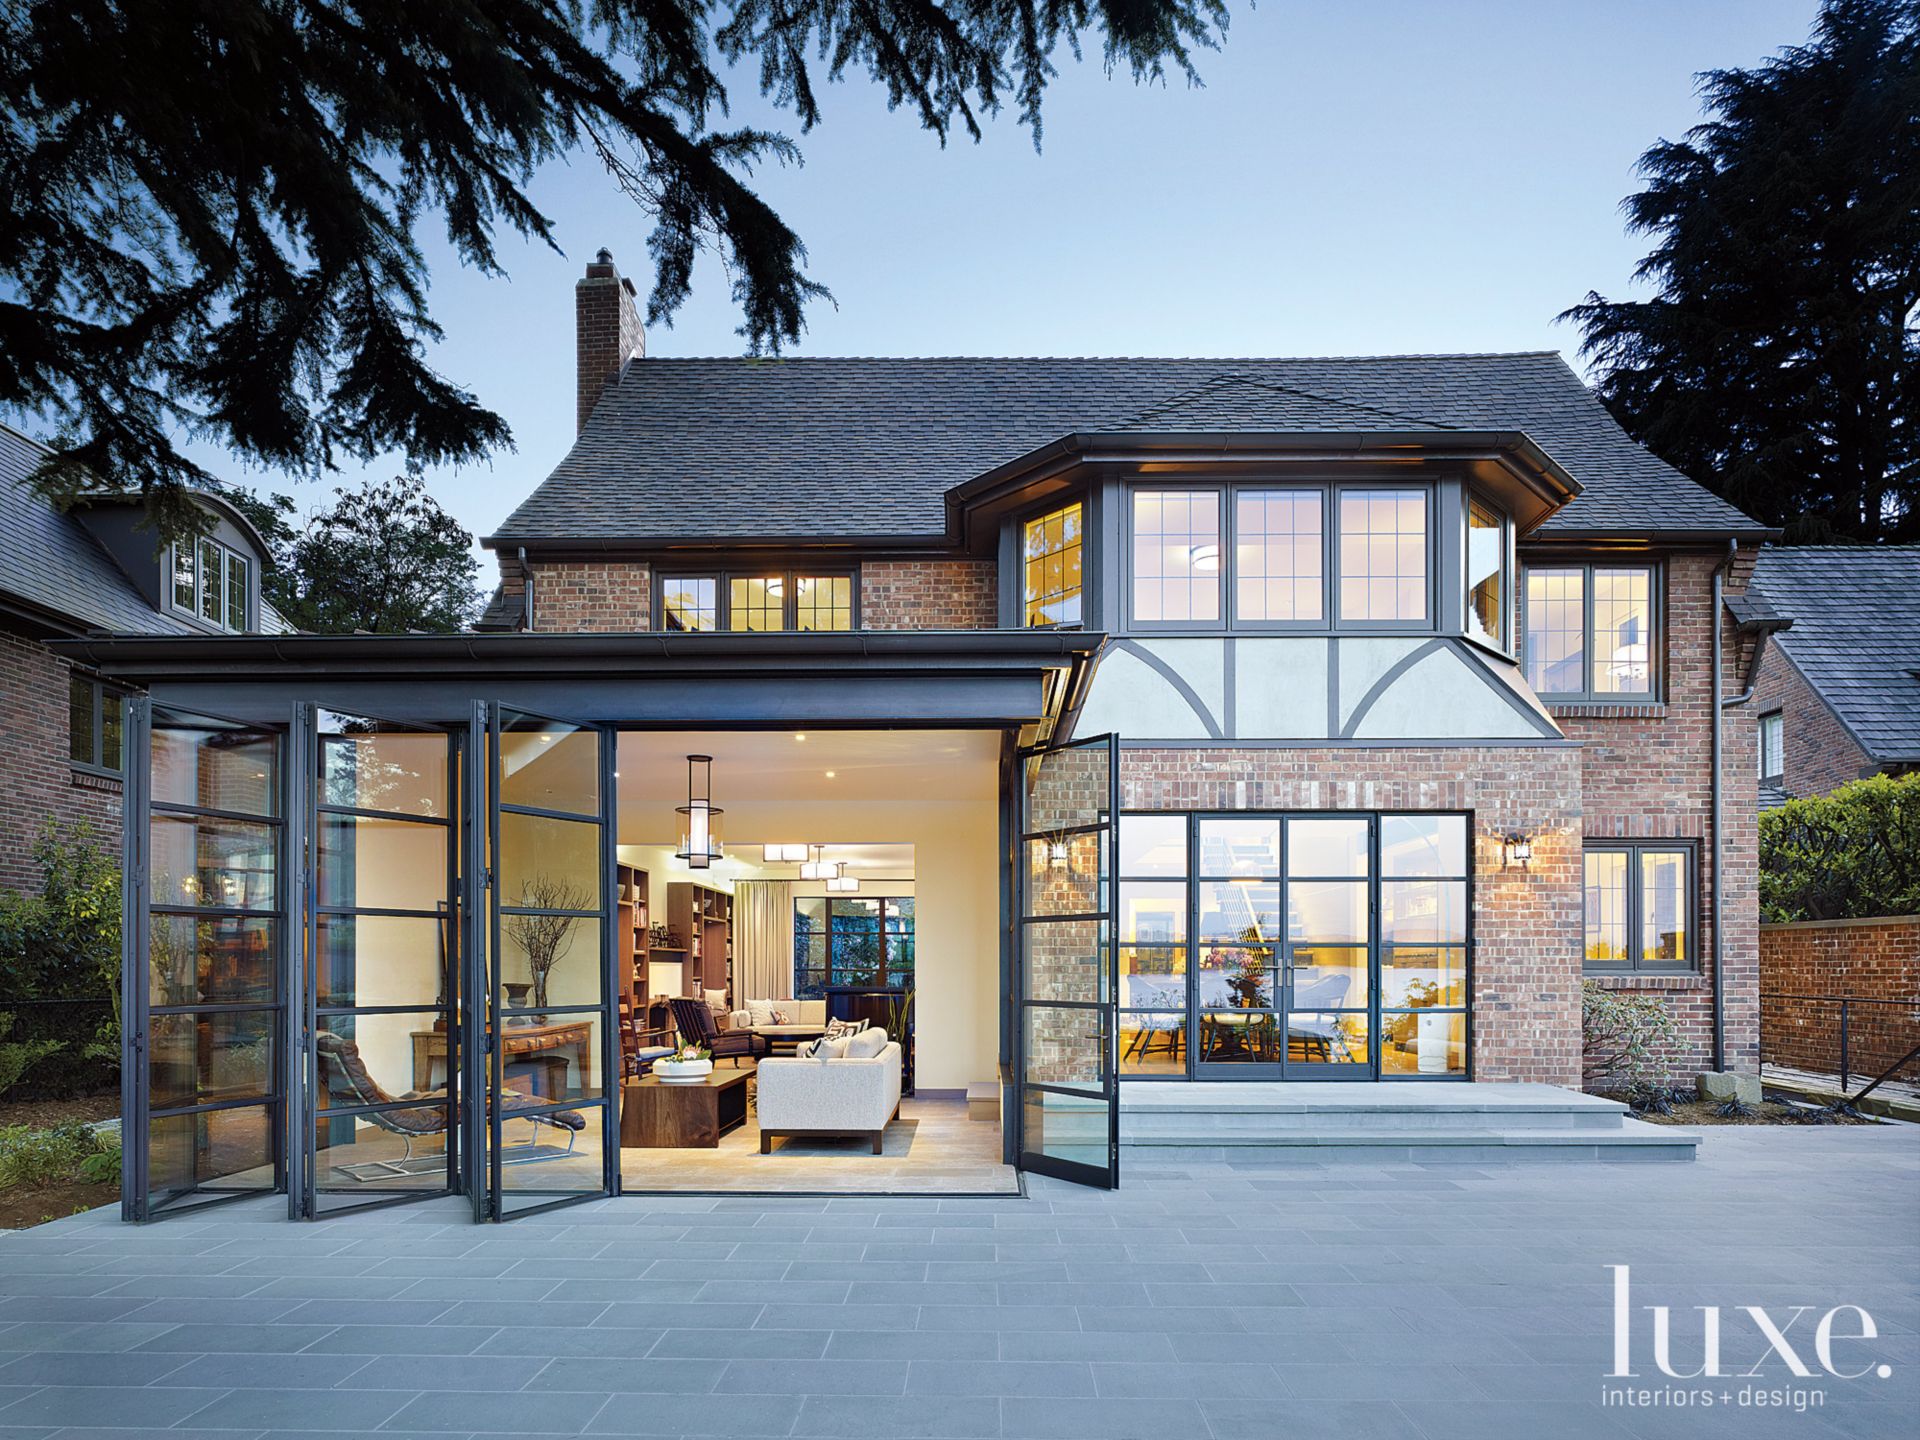 Classic Seattle Tudor Home With Contemporary Interiors